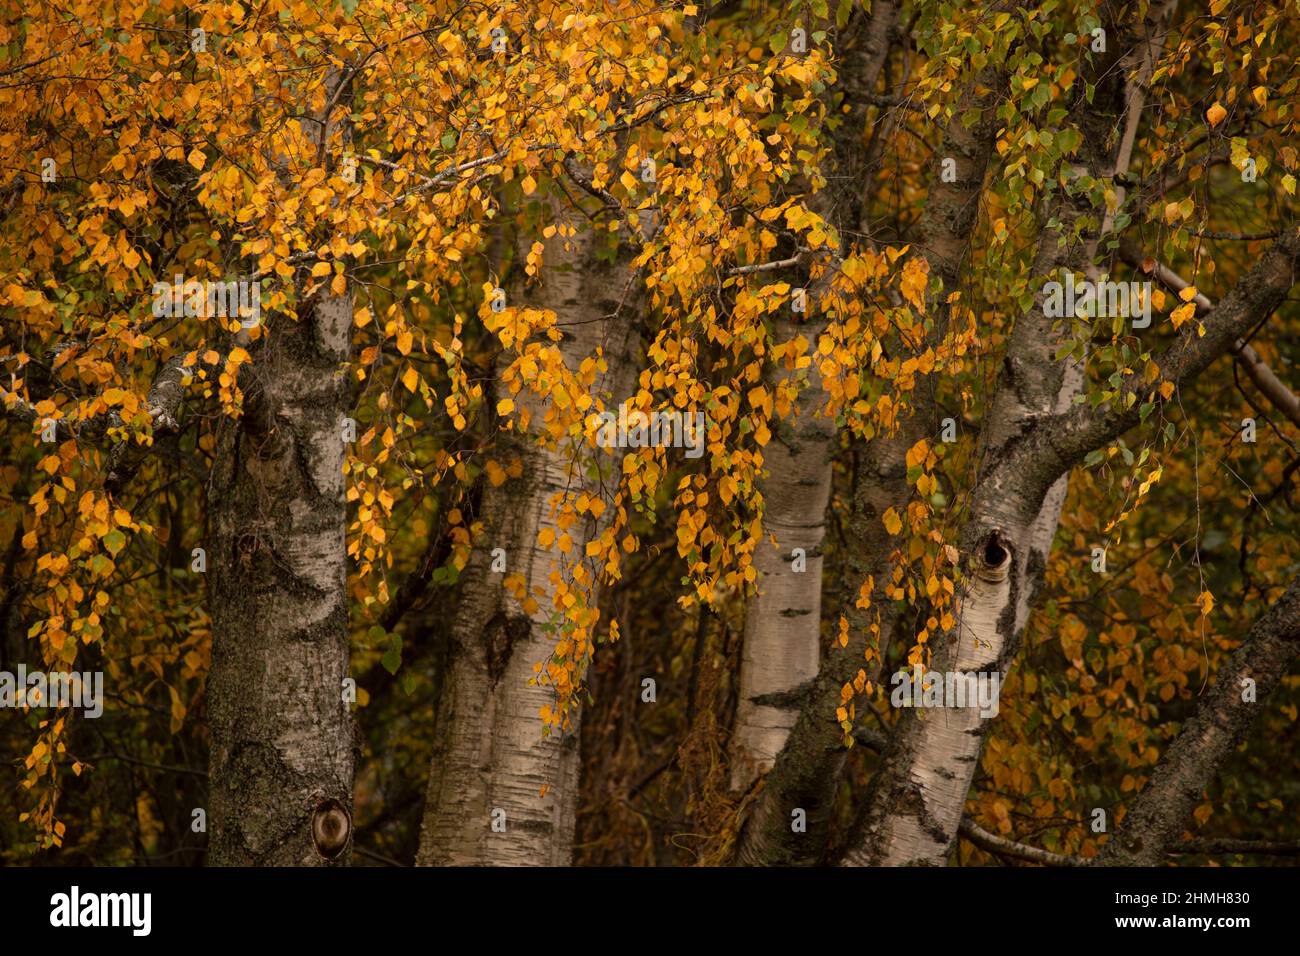 Birch tree branches in fall color, October, Finland Stock Photo